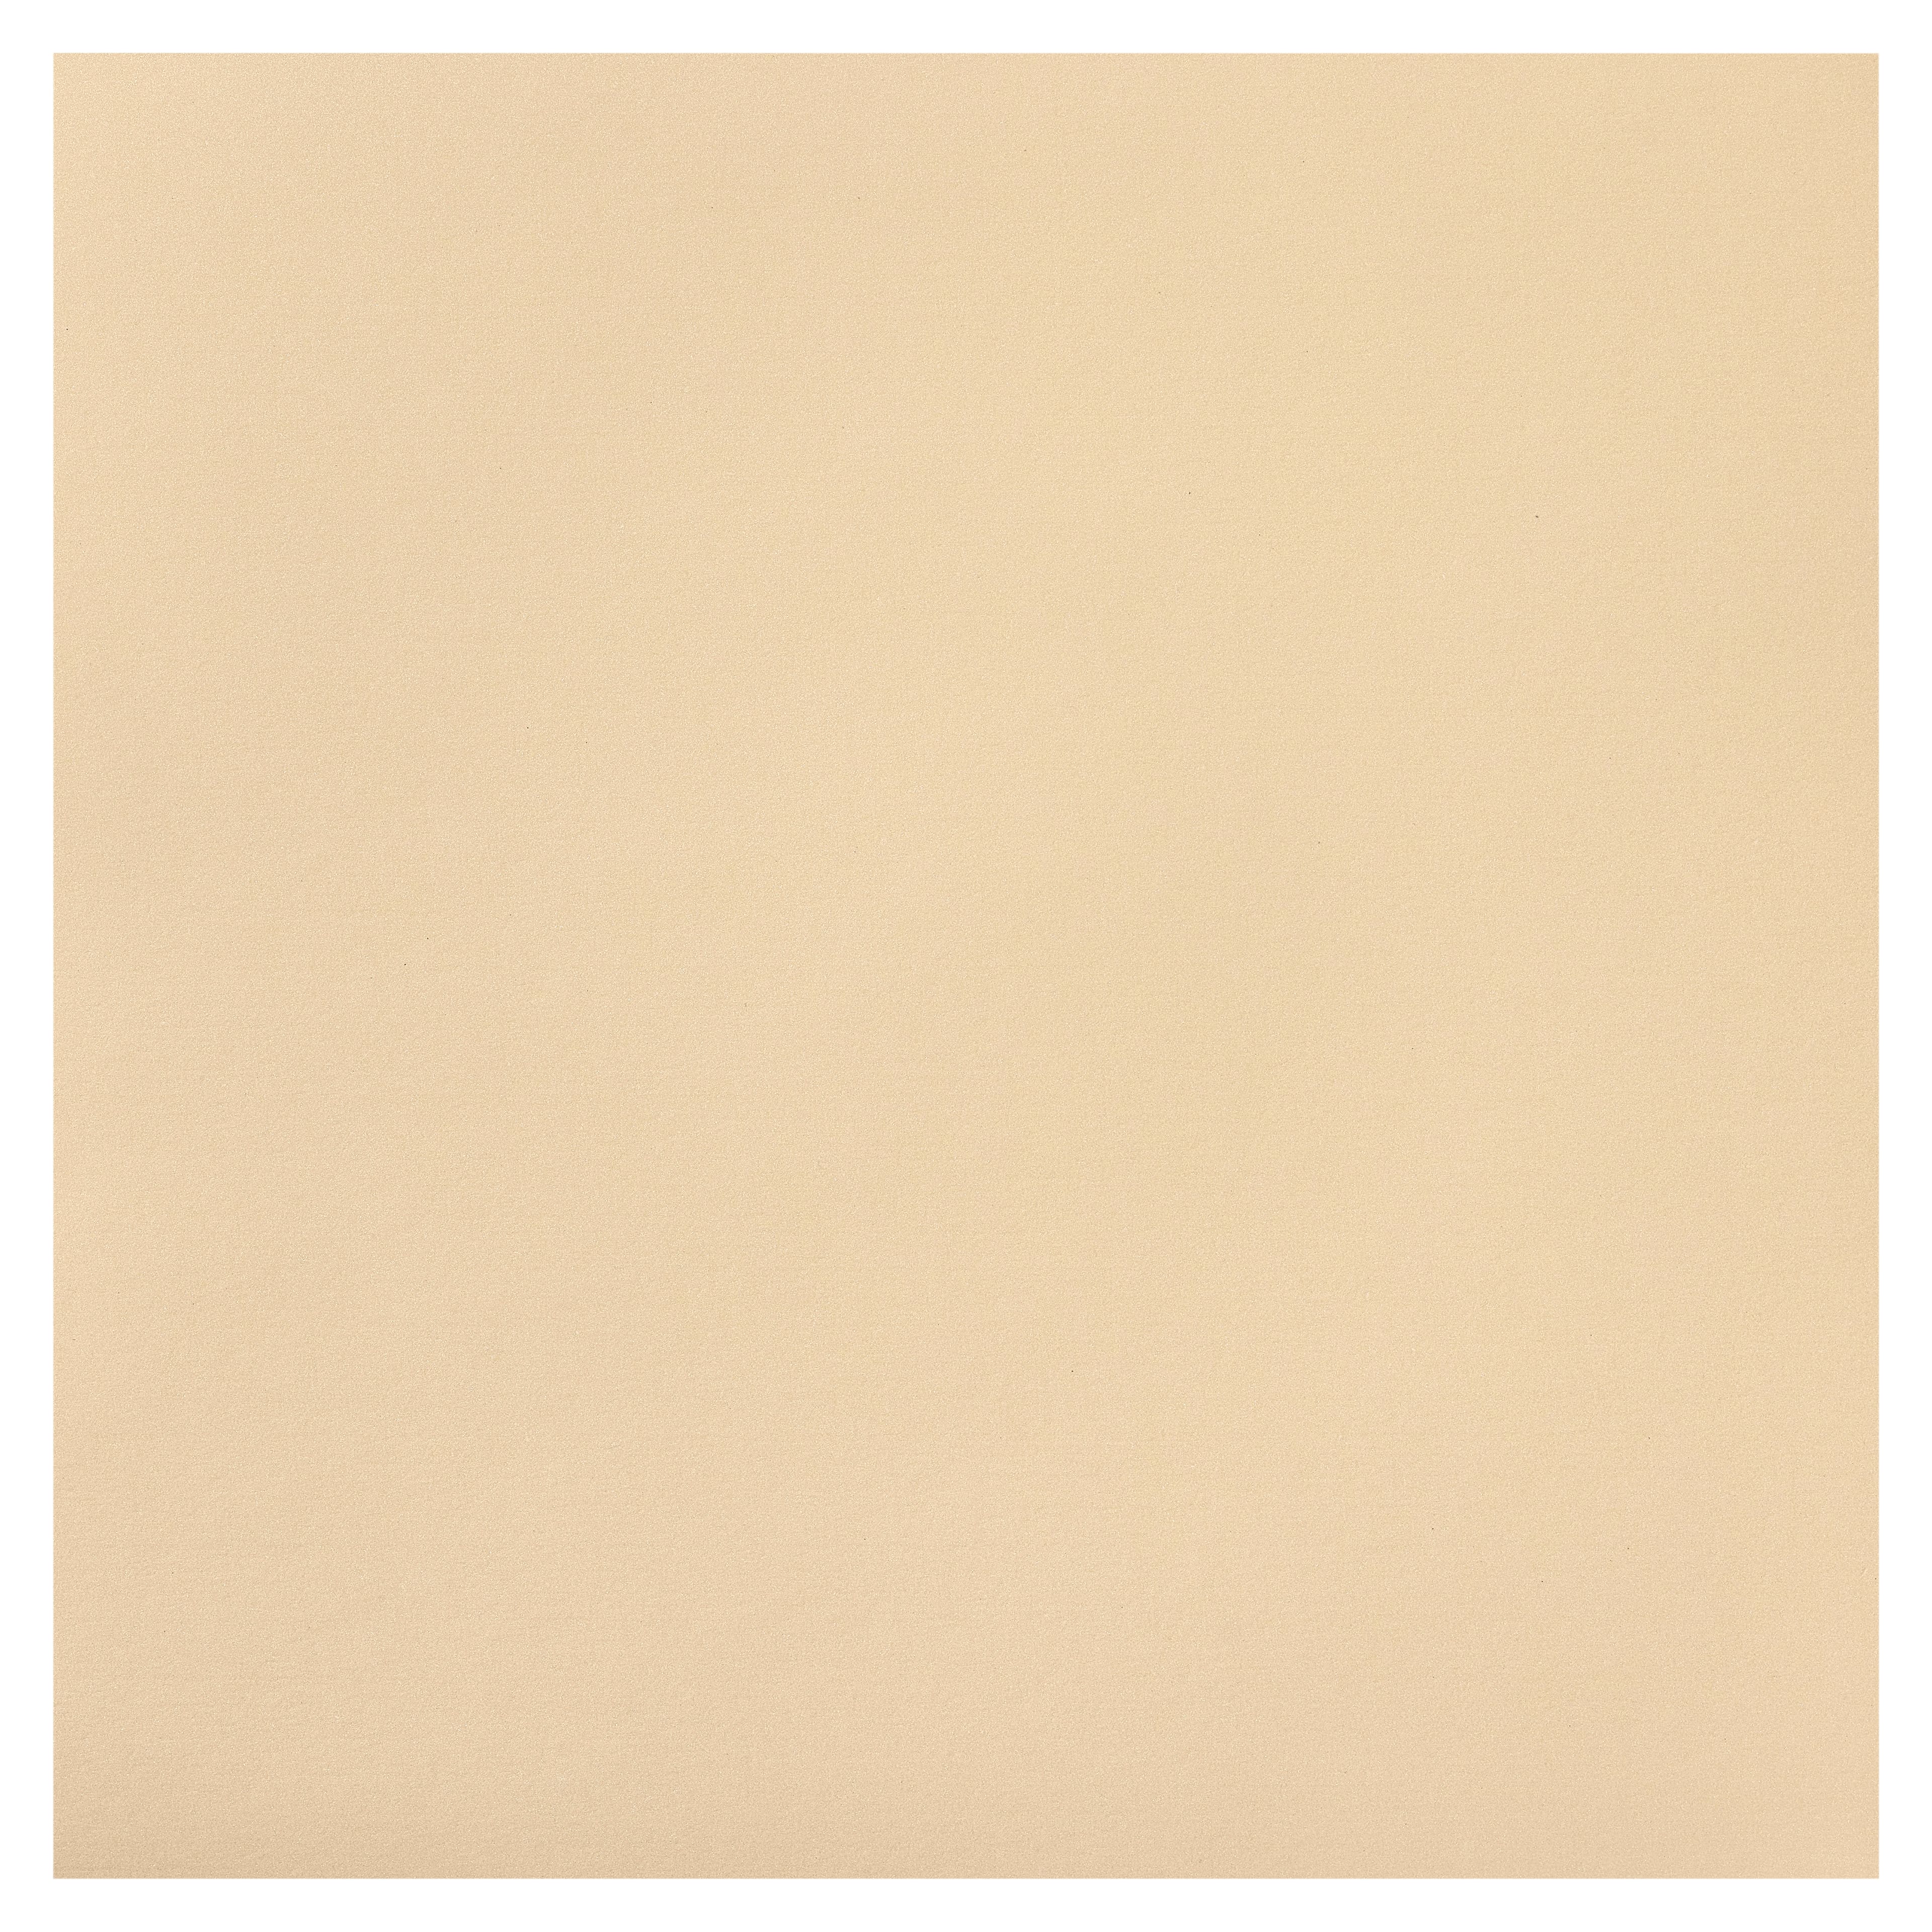 Ivory Starry Cardstock Paper by Recollections®, 12 x 12